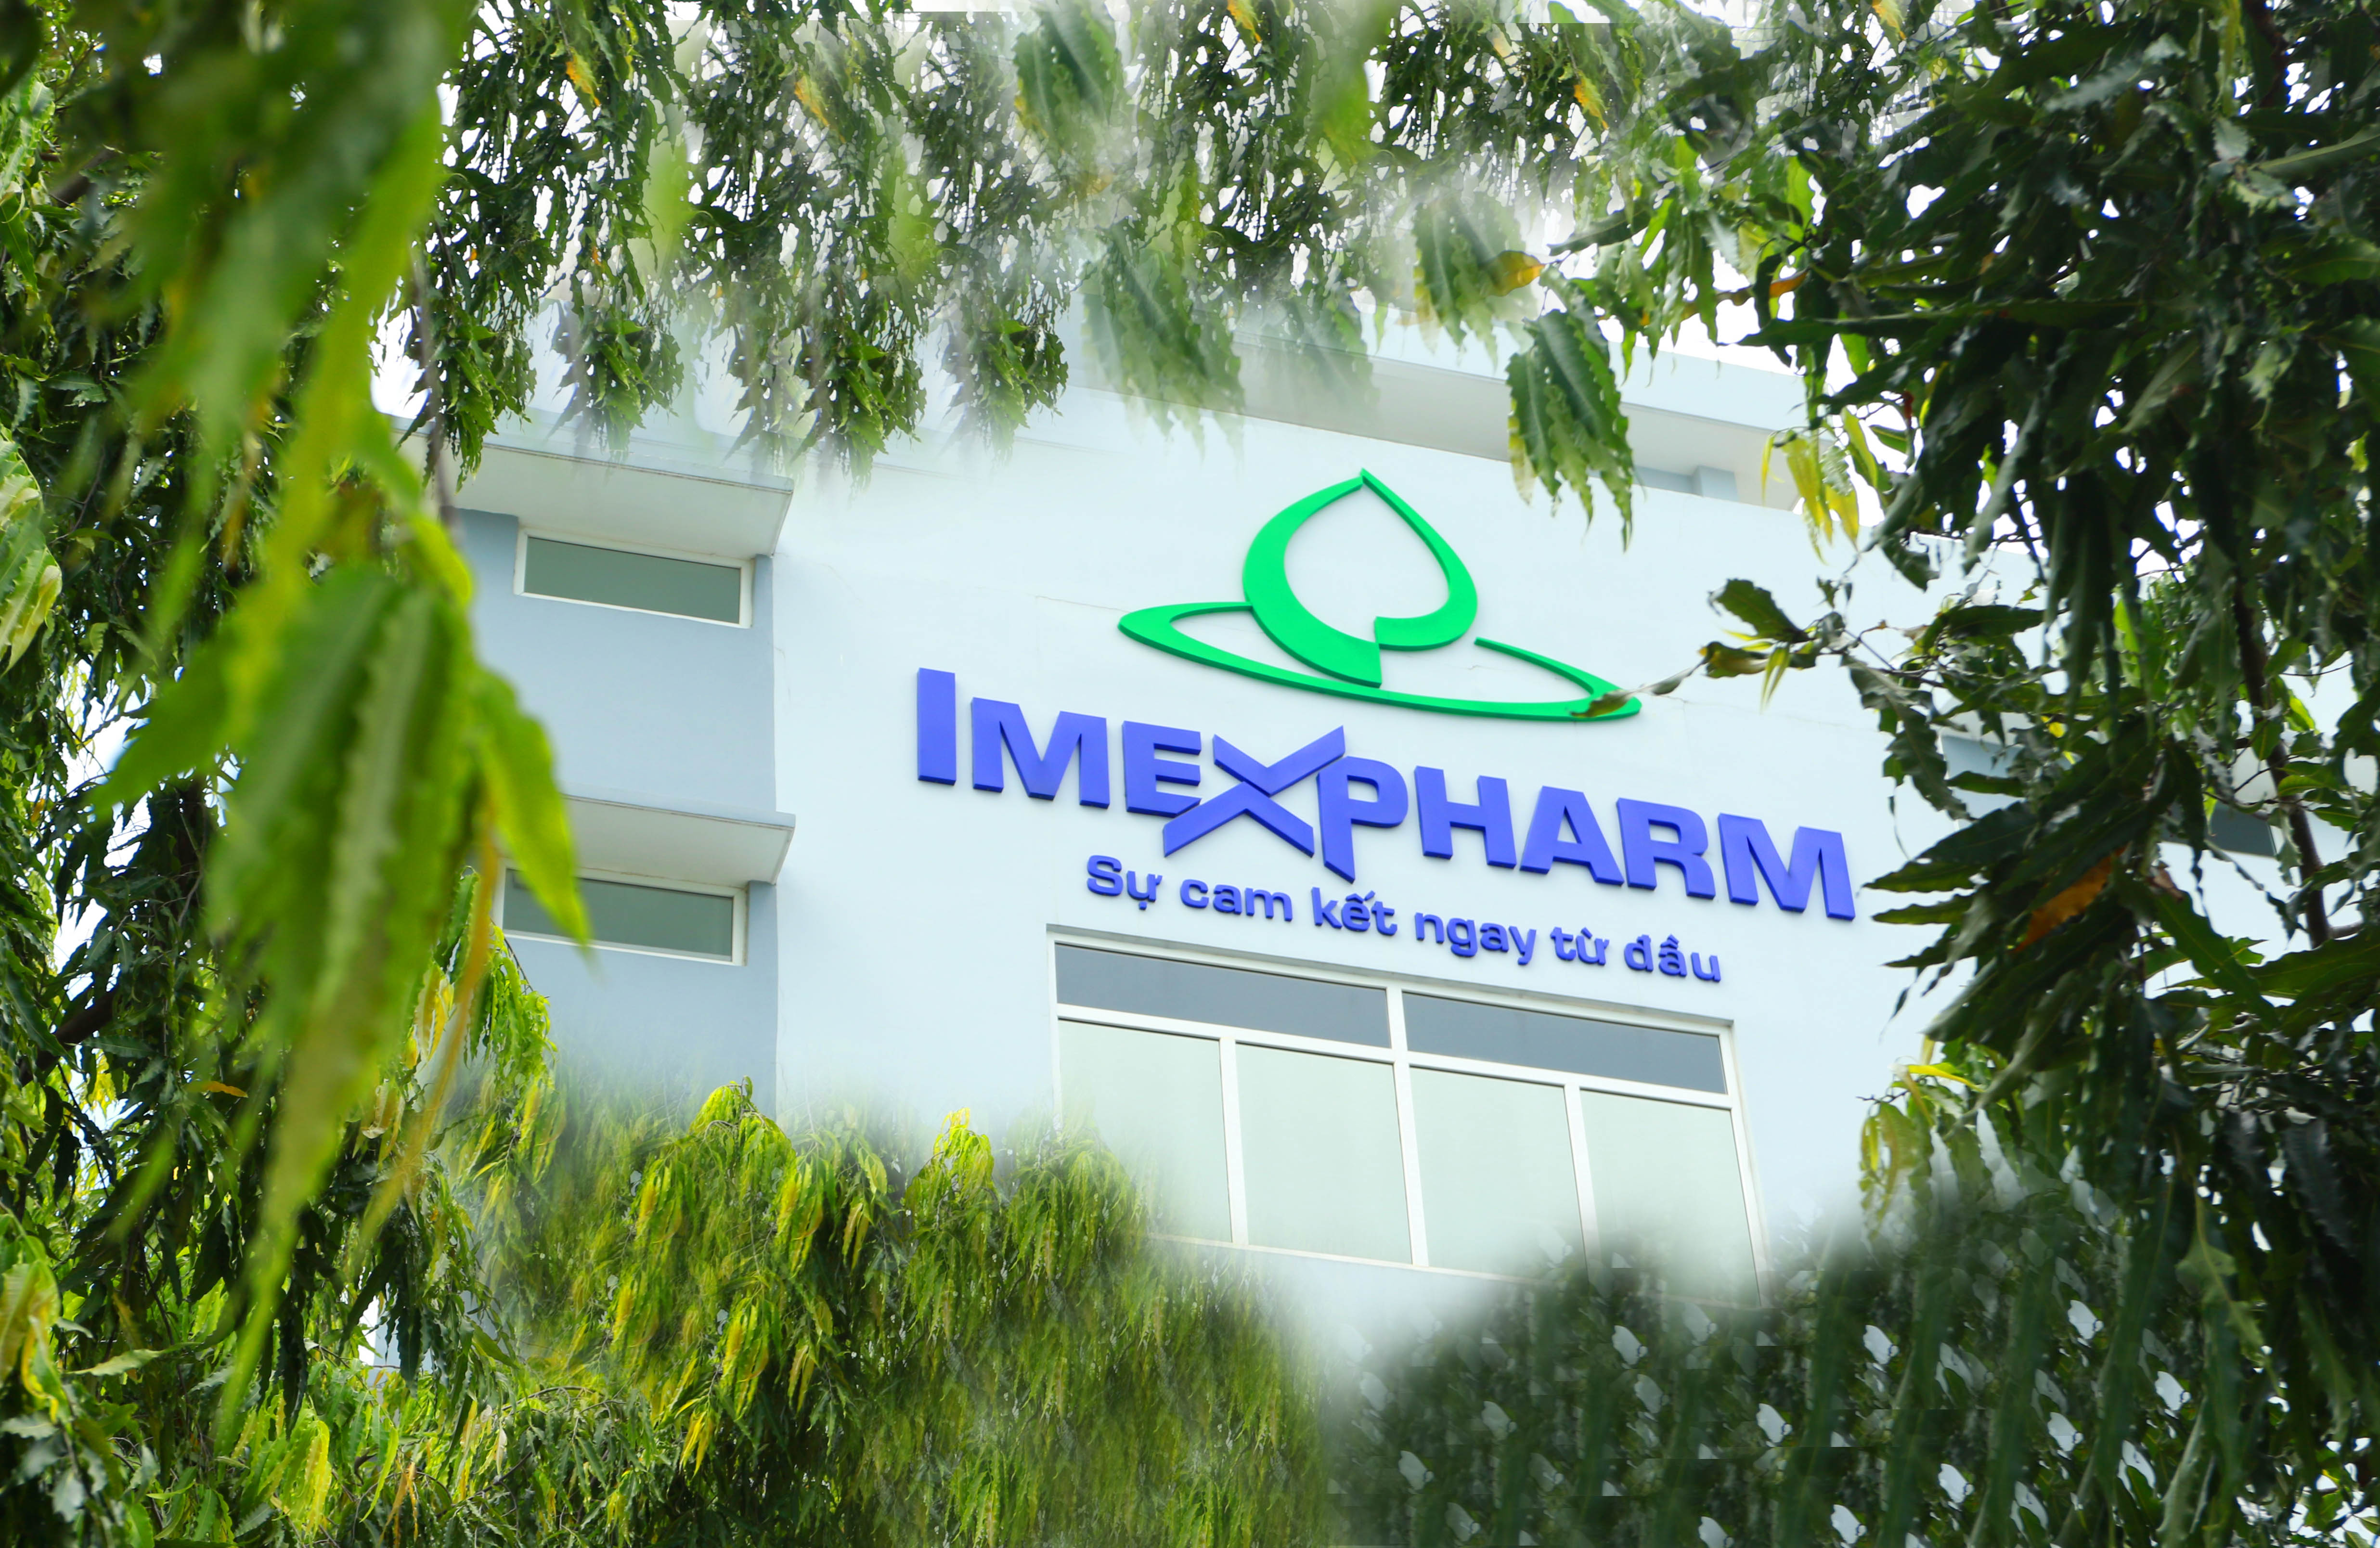 Dong Thap Provincial People's Committee Grants Environmental License to Imexpharm Pharmaceutical JSC.